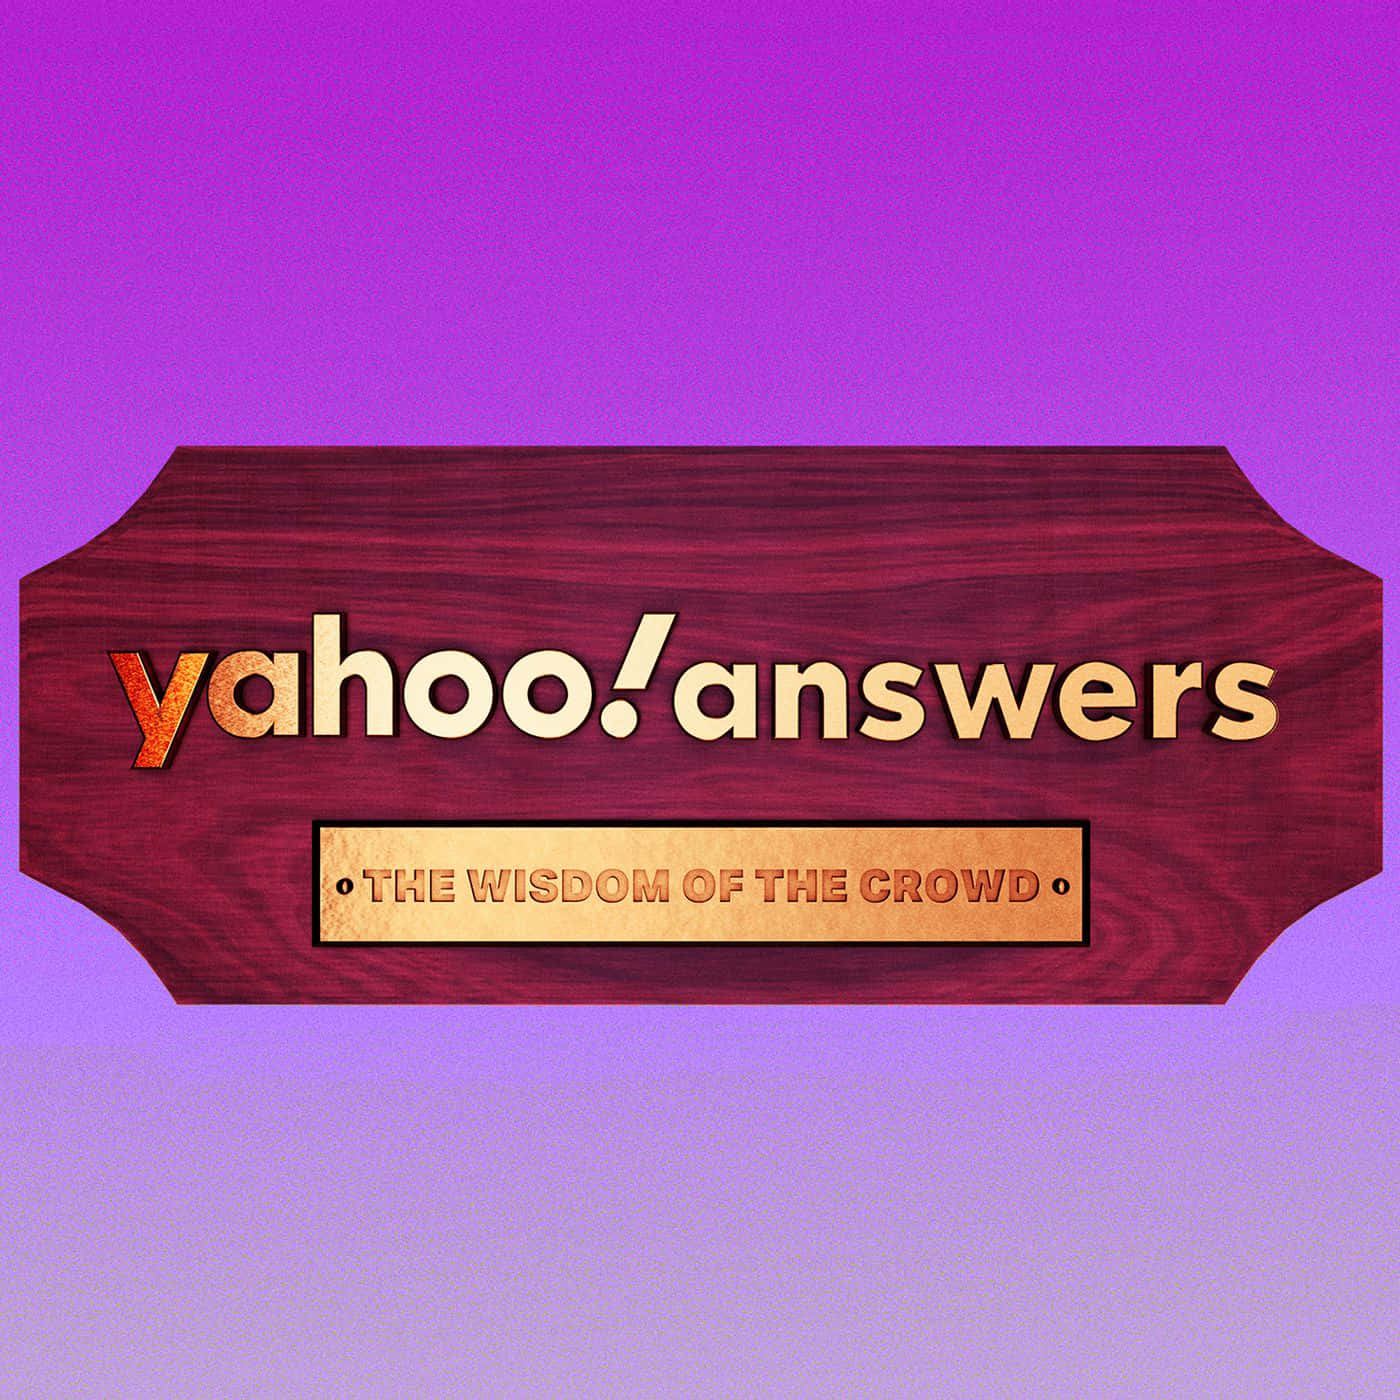 Get the latest news, sports, and finance on Yahoo!